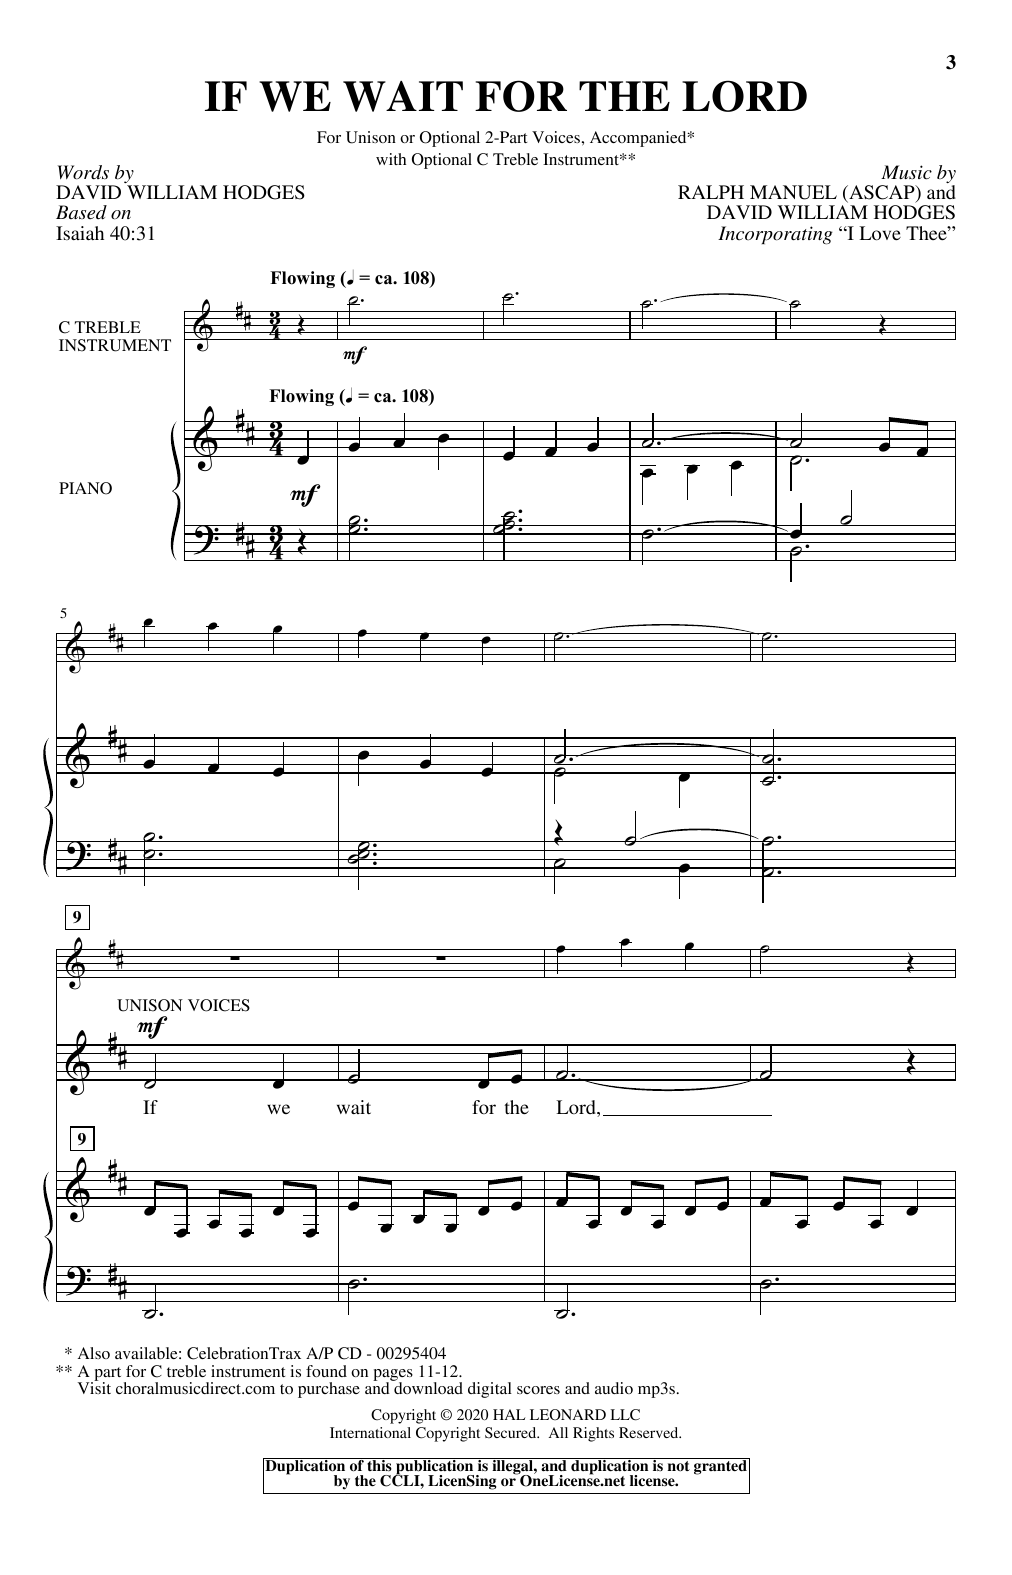 Download David William Hodges and Ralph Manue If We Wait For The Lord Sheet Music